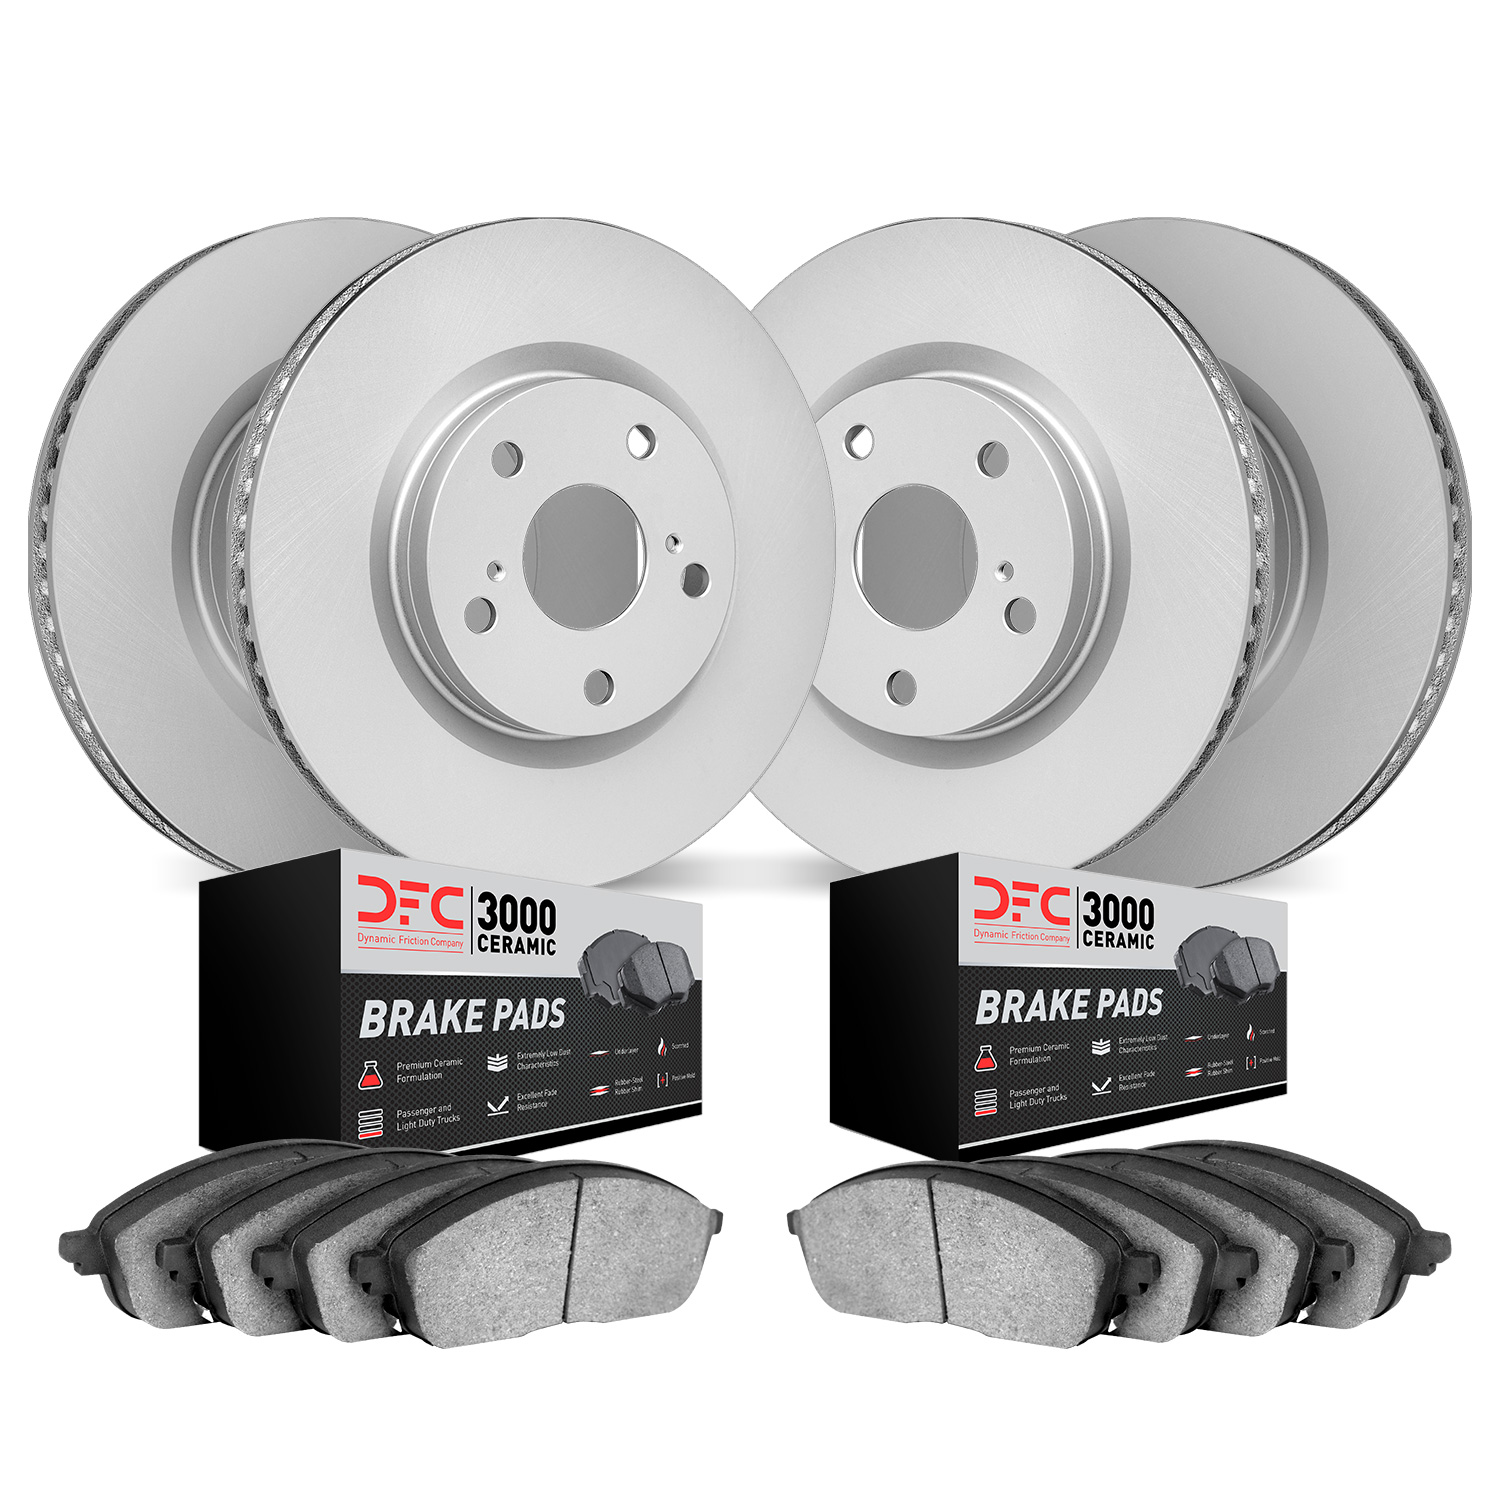 4304-68004 Geospec Brake Rotors with 3000-Series Ceramic Brake Pads Kit, 2007-2015 Infiniti/Nissan, Position: Front and Rear